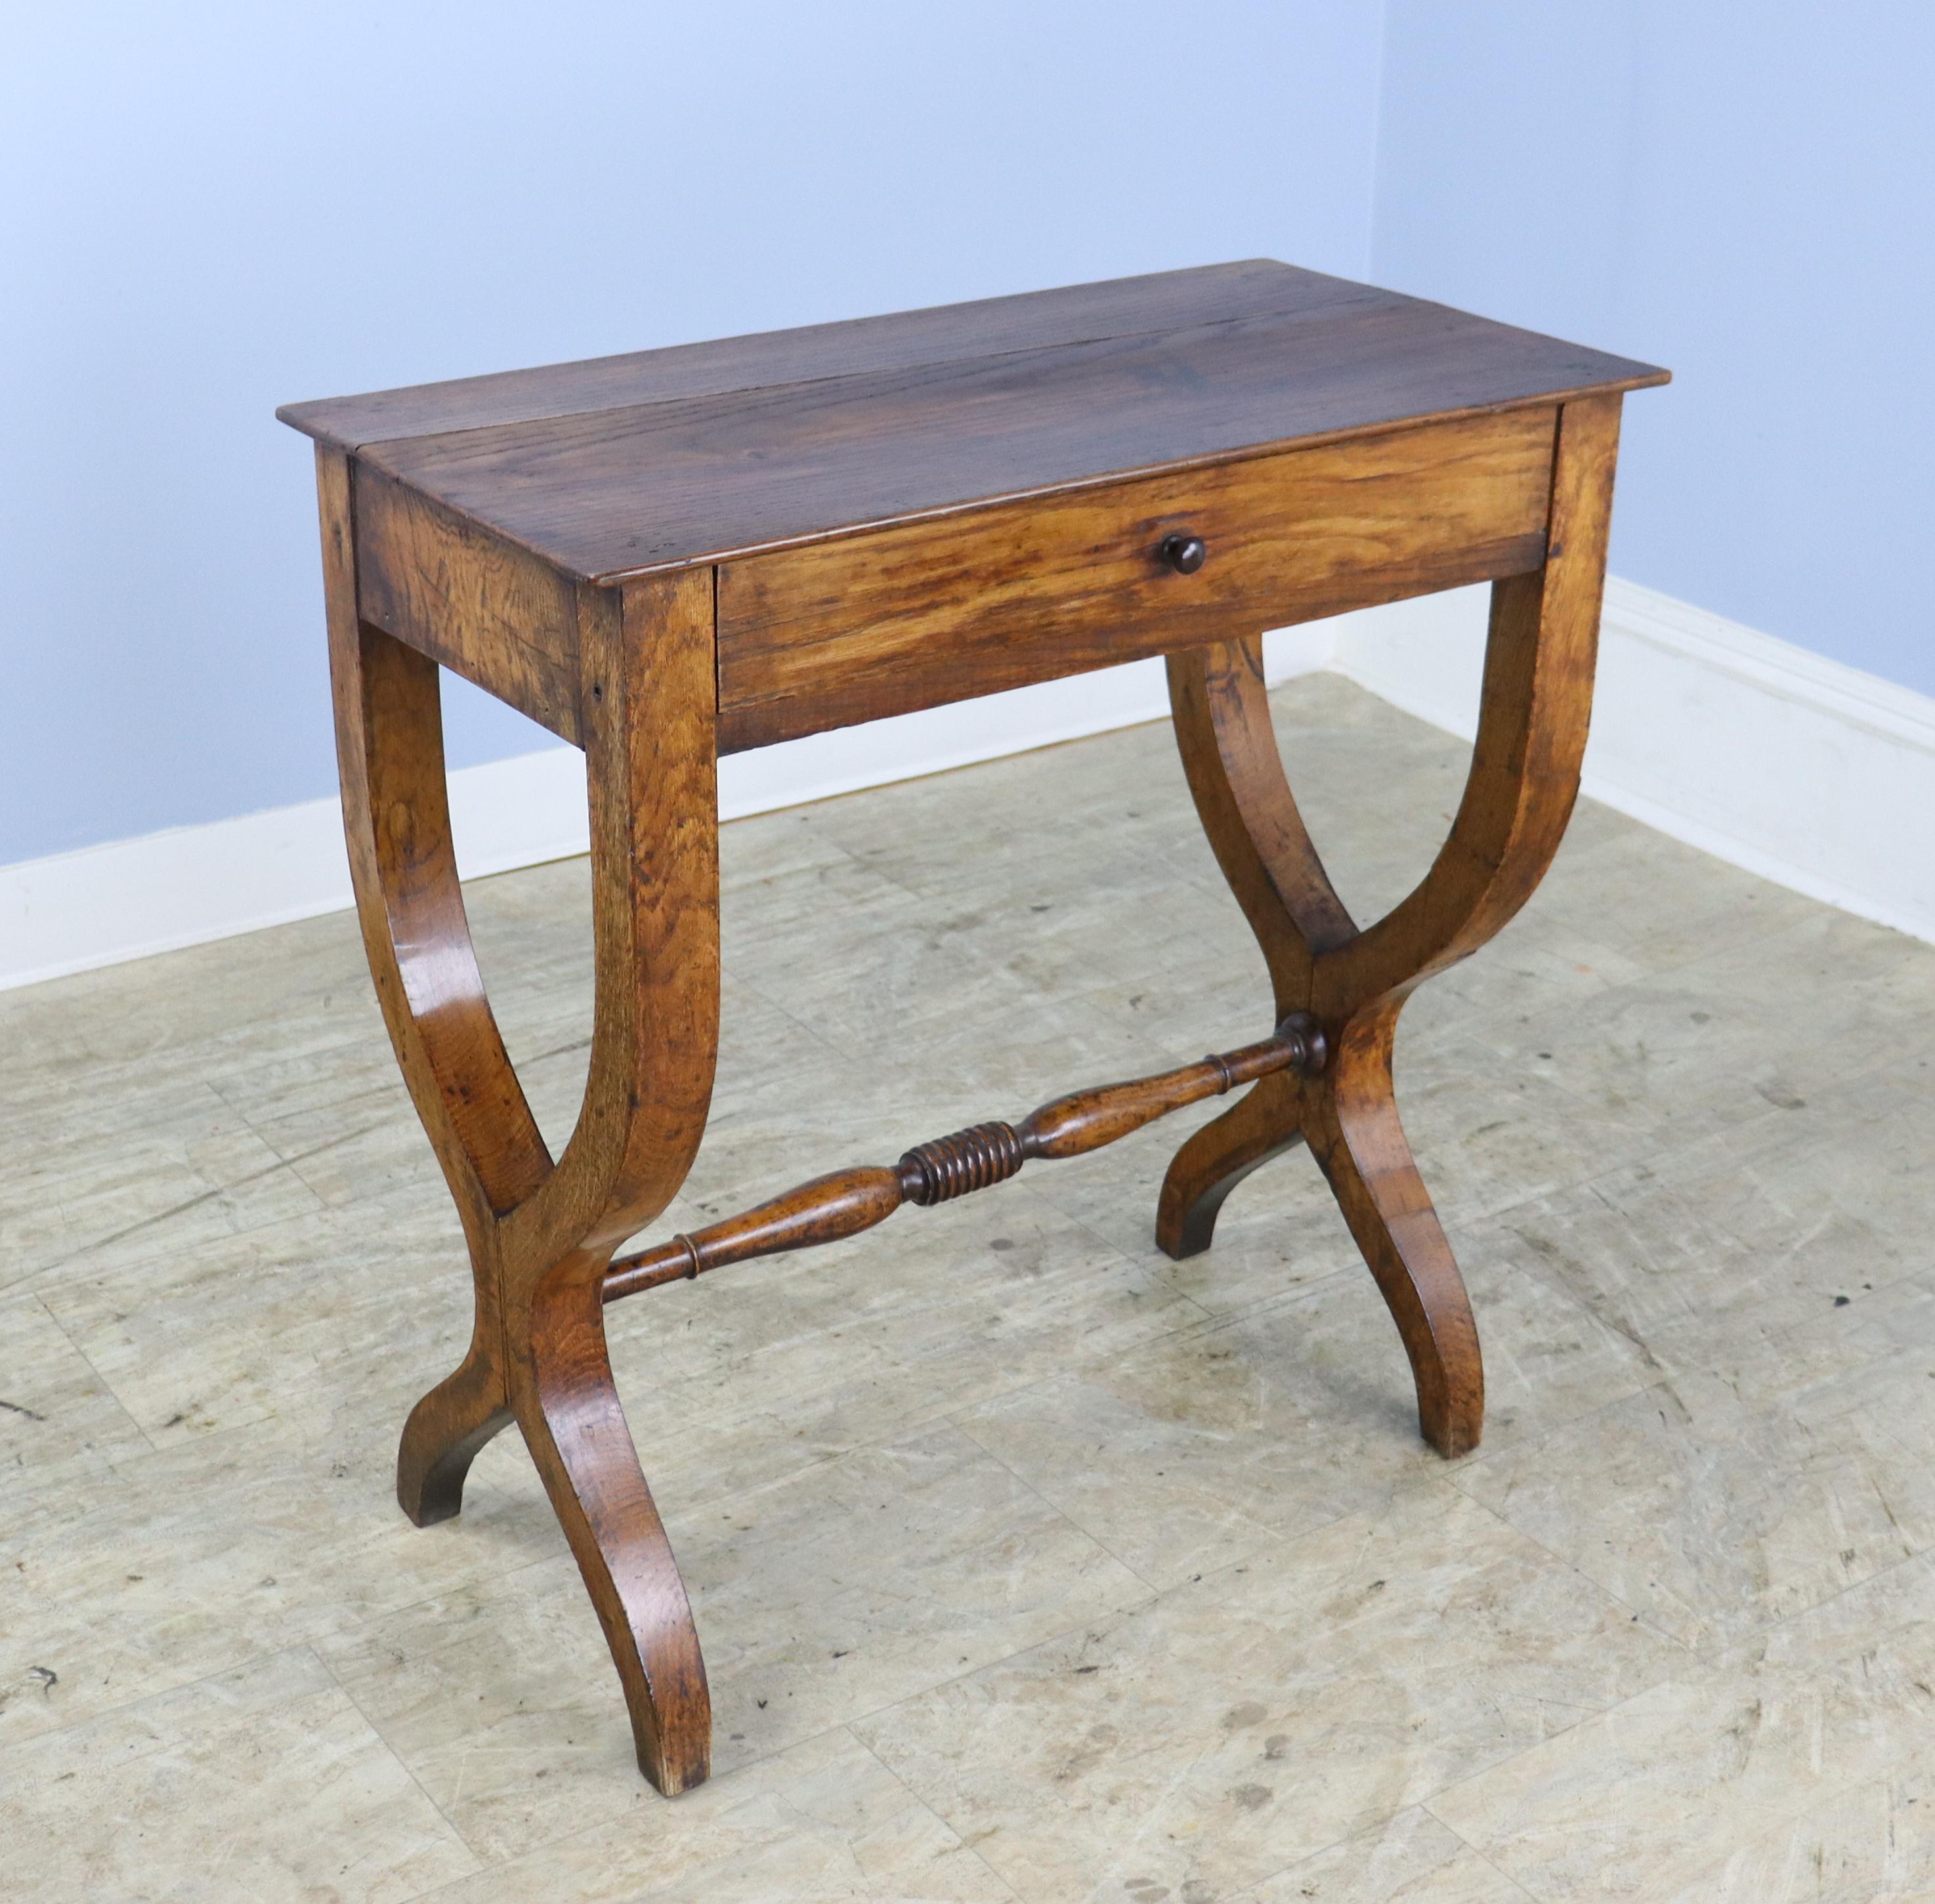 A charming sabre-legged chestnut side table with a single drawer and small wooden knob. Vivid chestnut grain and an unusual shape give this end or lamp table lots of visual impact.